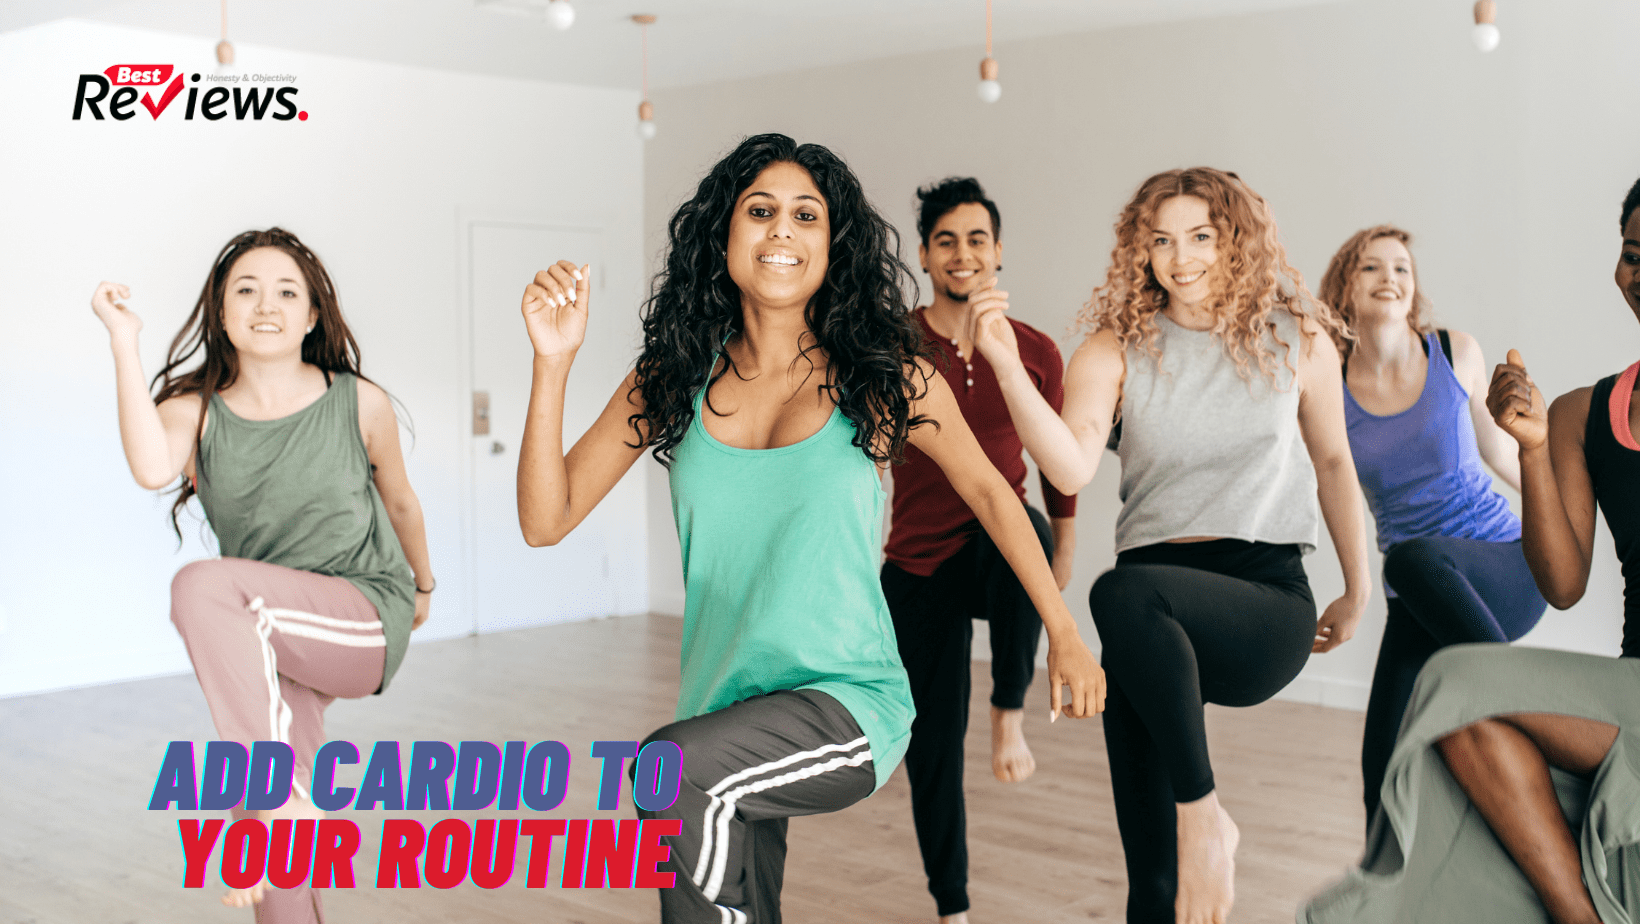 Add cardio to your routine